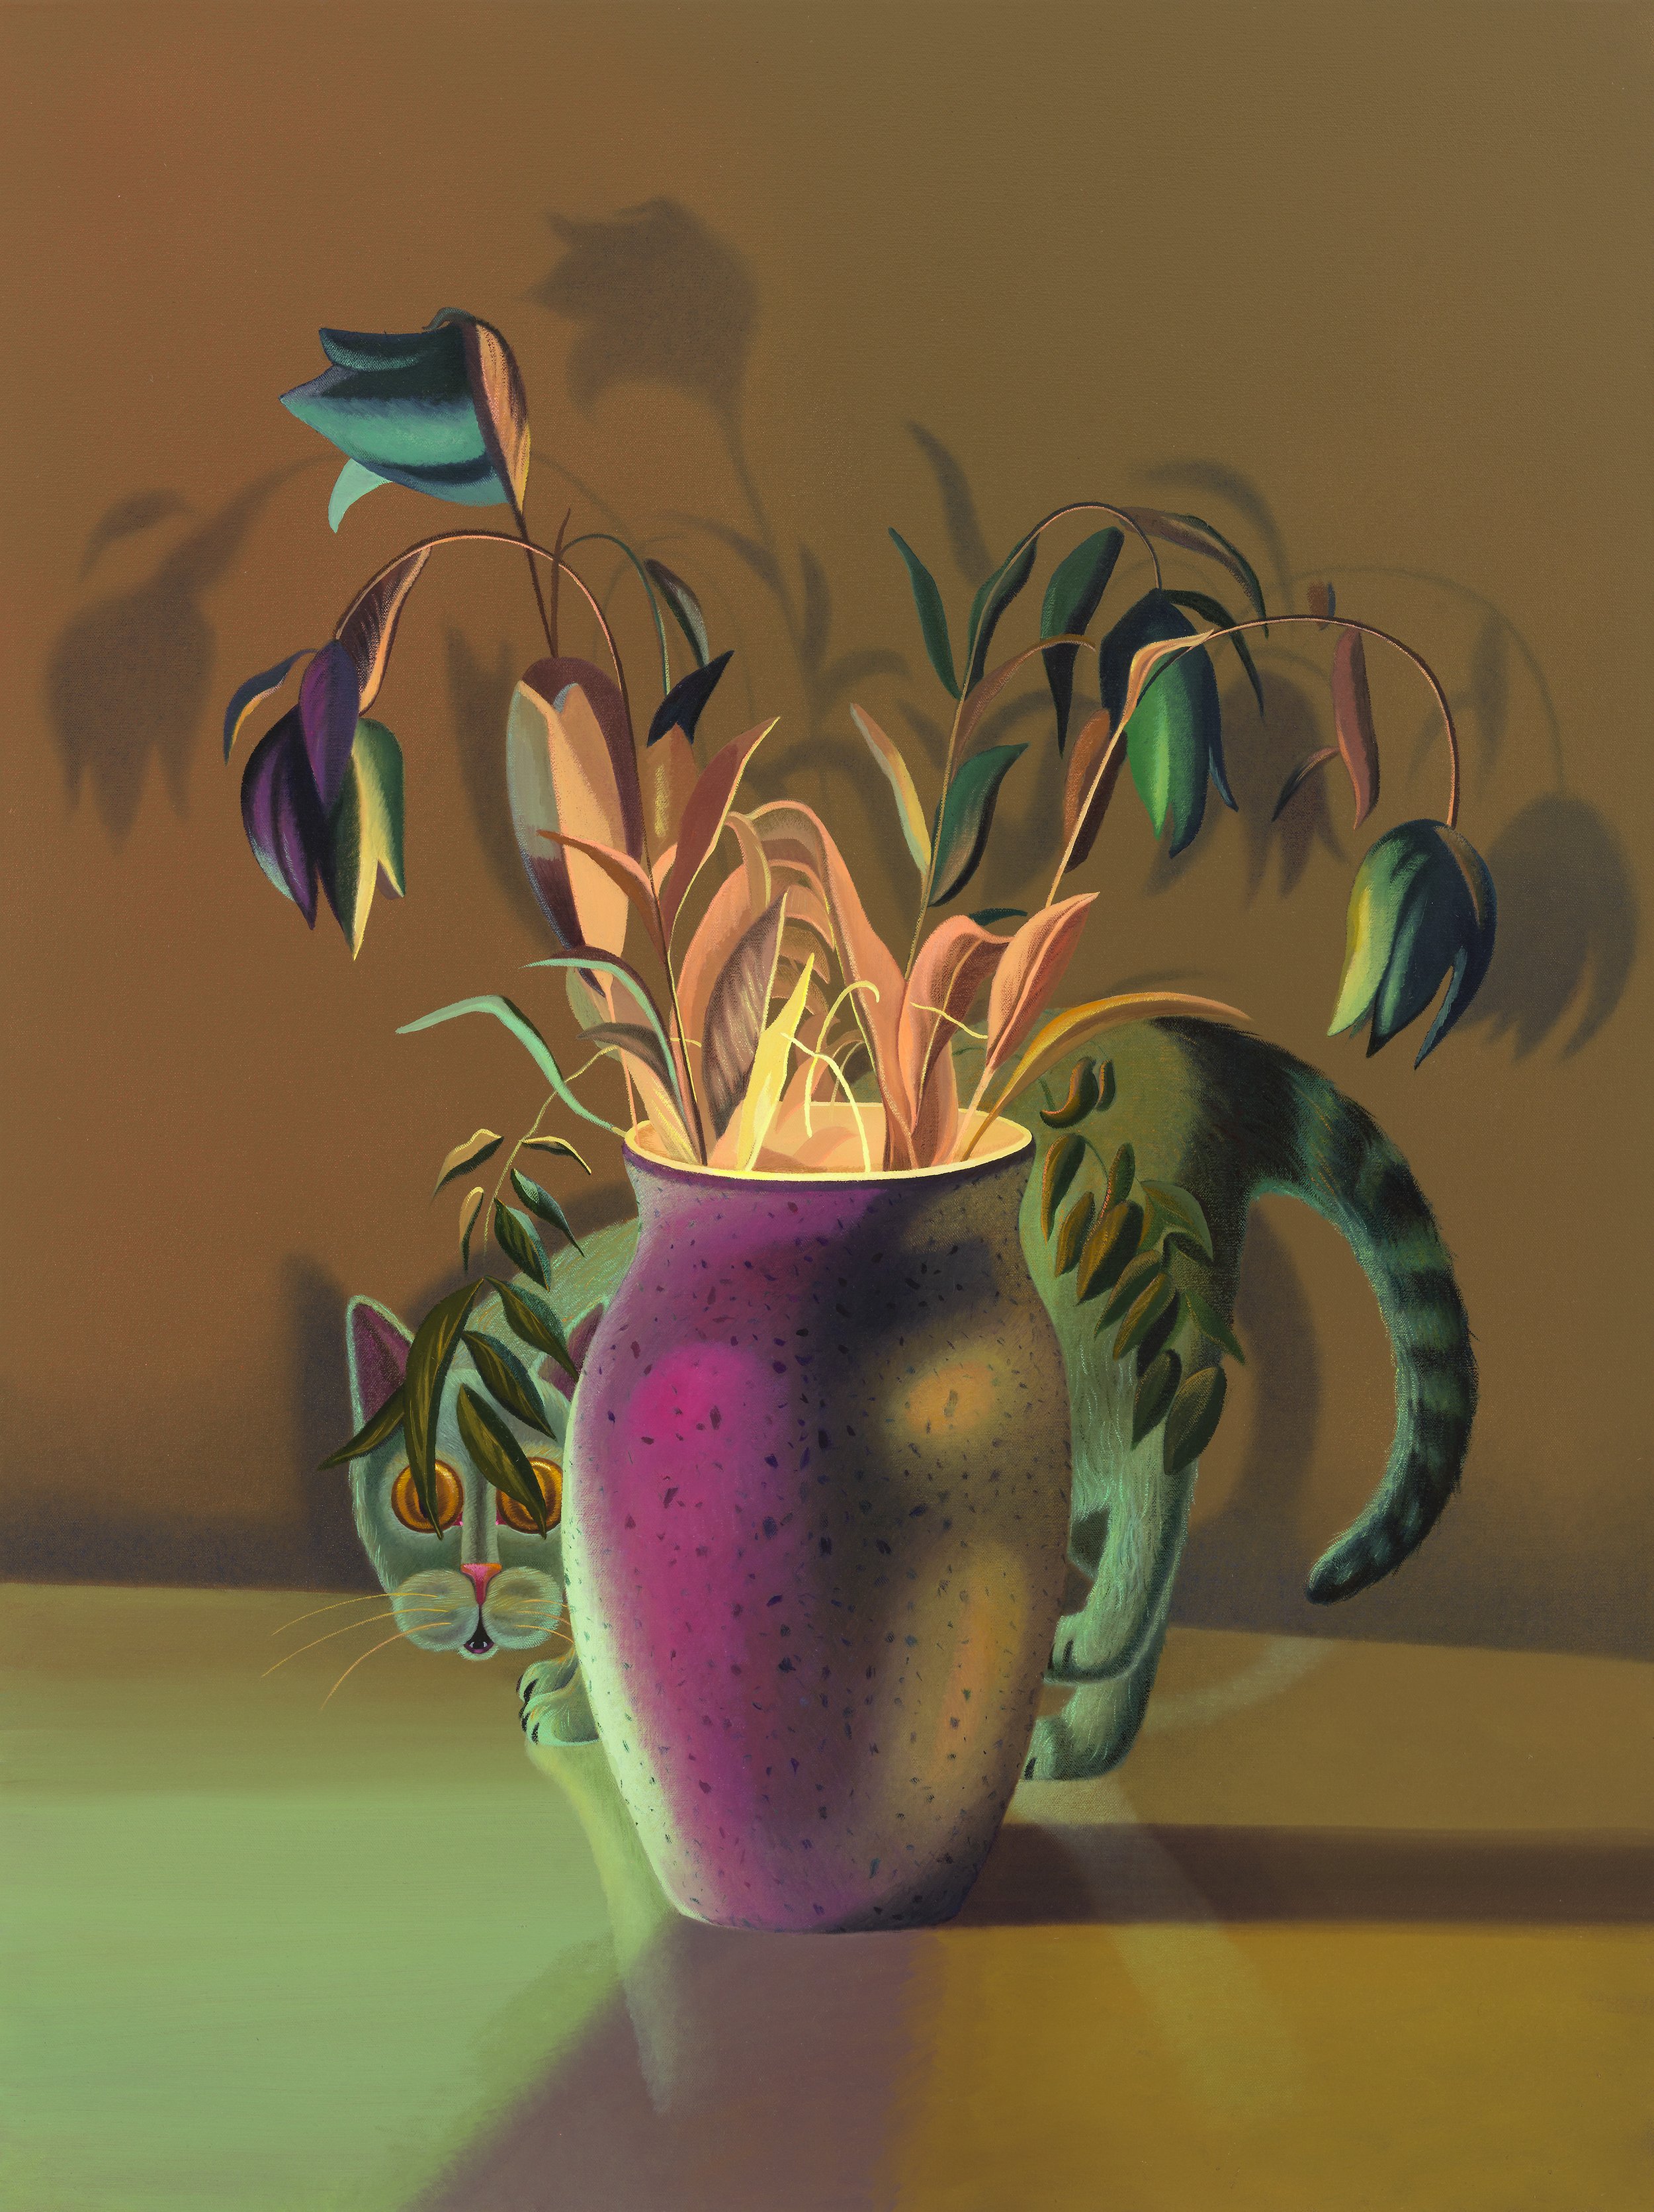 Glowing Vase, oil and acrylic on canvas, 40" x 30", 2023